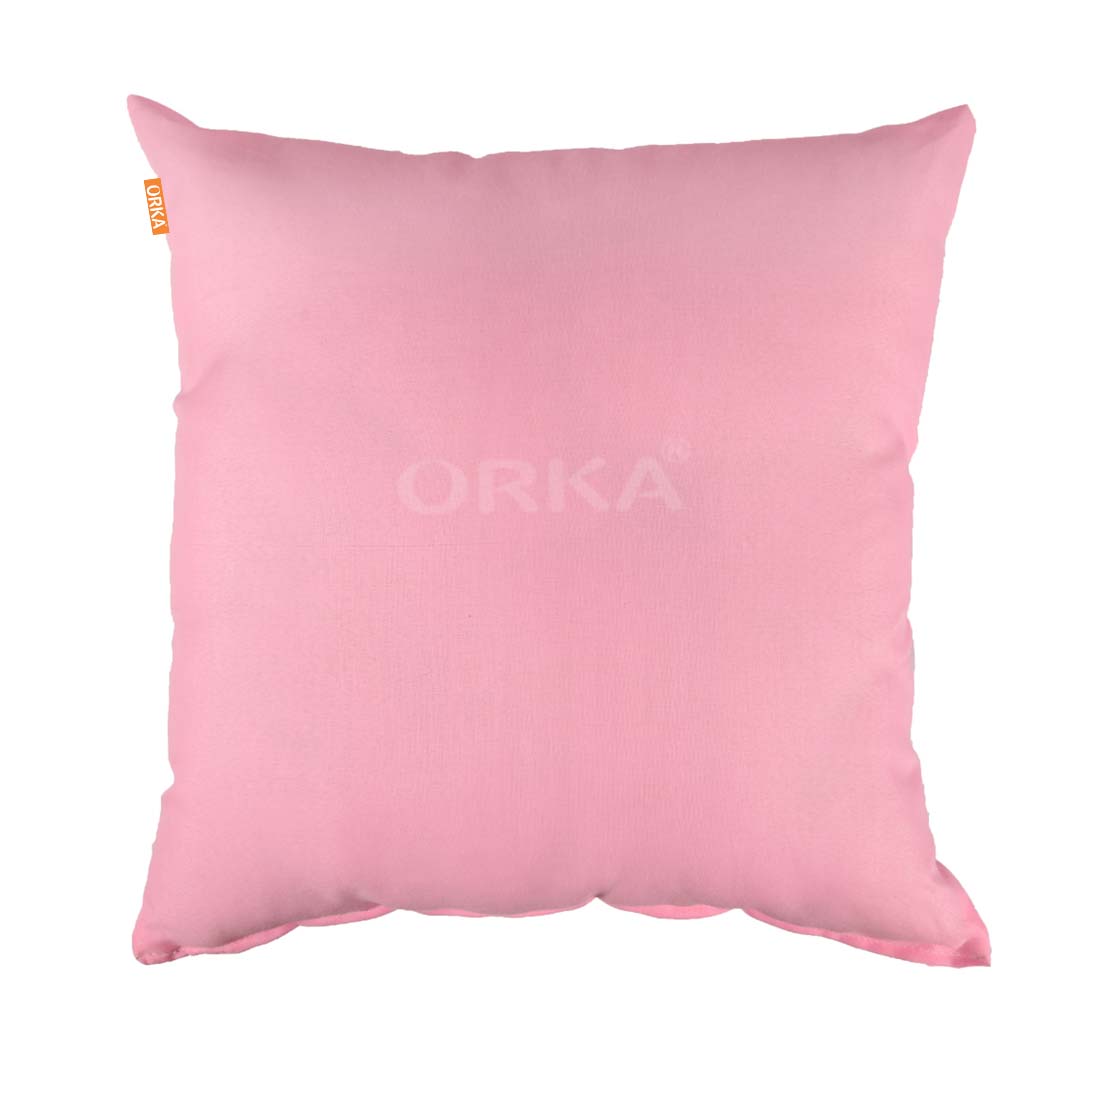 Cushion Cover Insert (Pink)  